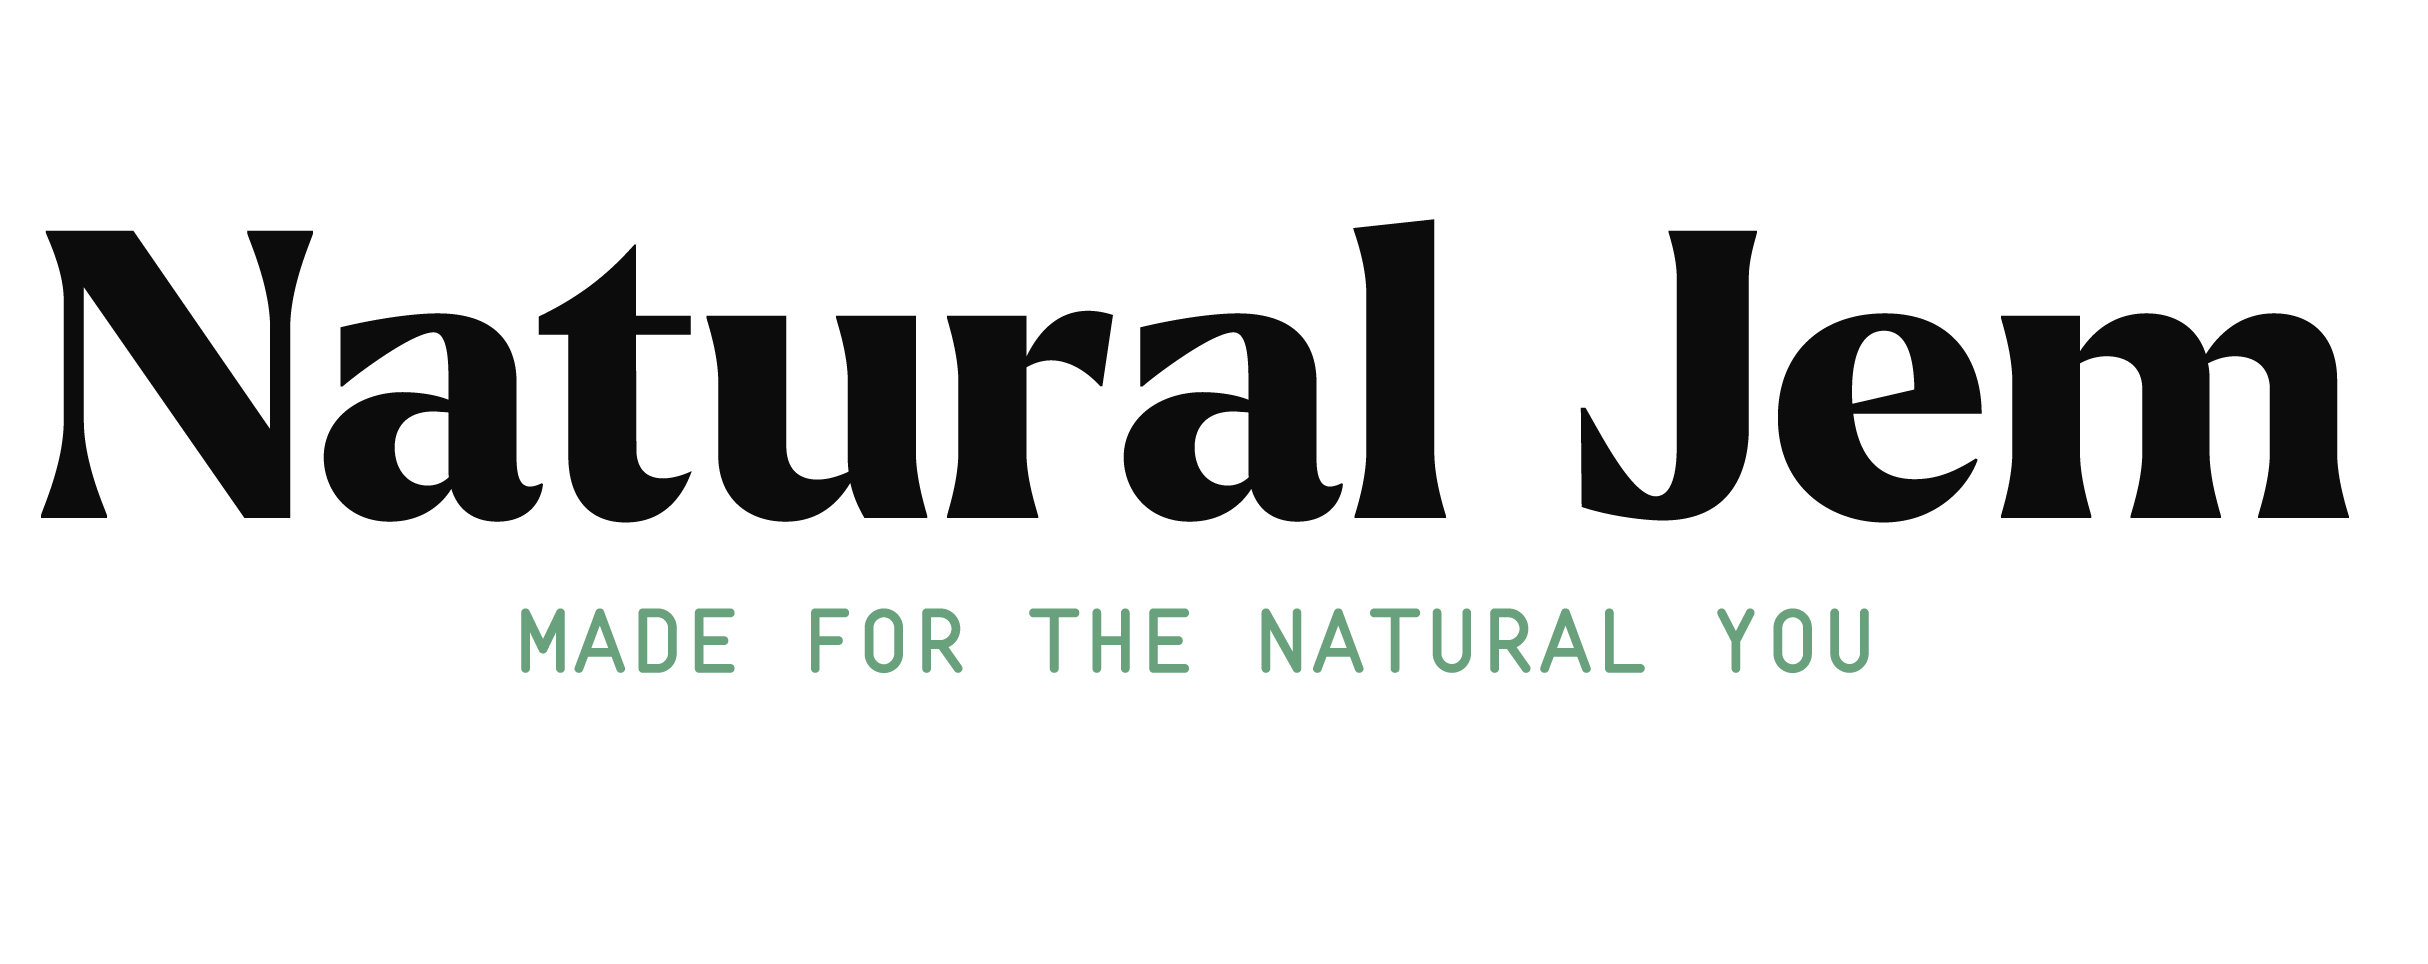 Welcome to Natural Jem